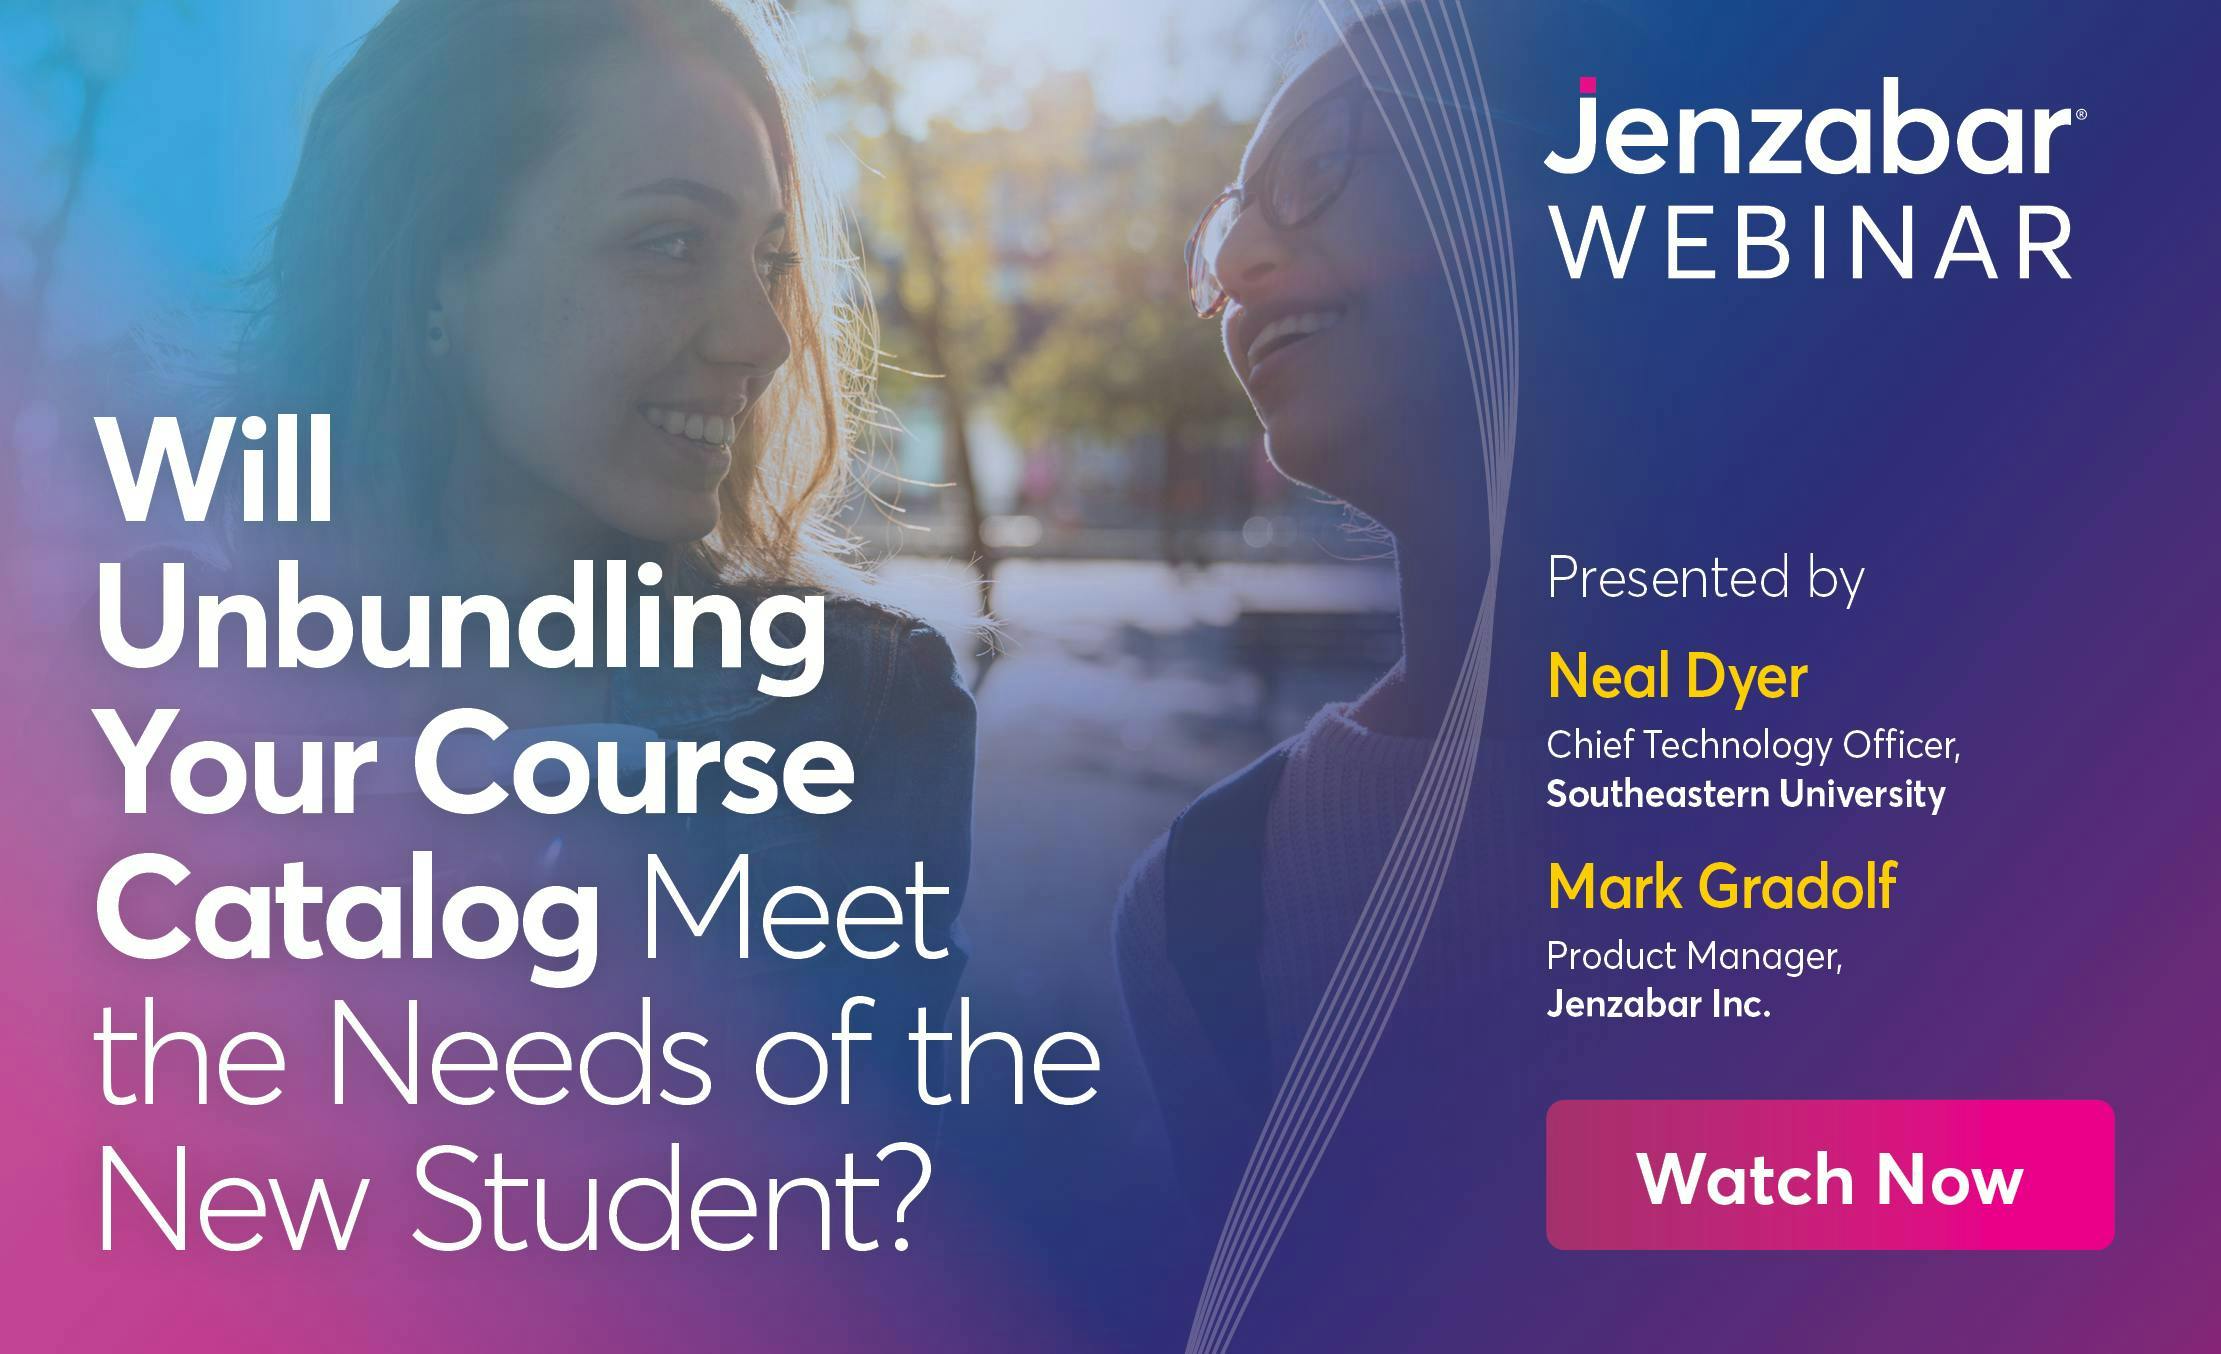 Webinar: Will Unbundling Your Course Catalog Meet the Needs of the New Student?